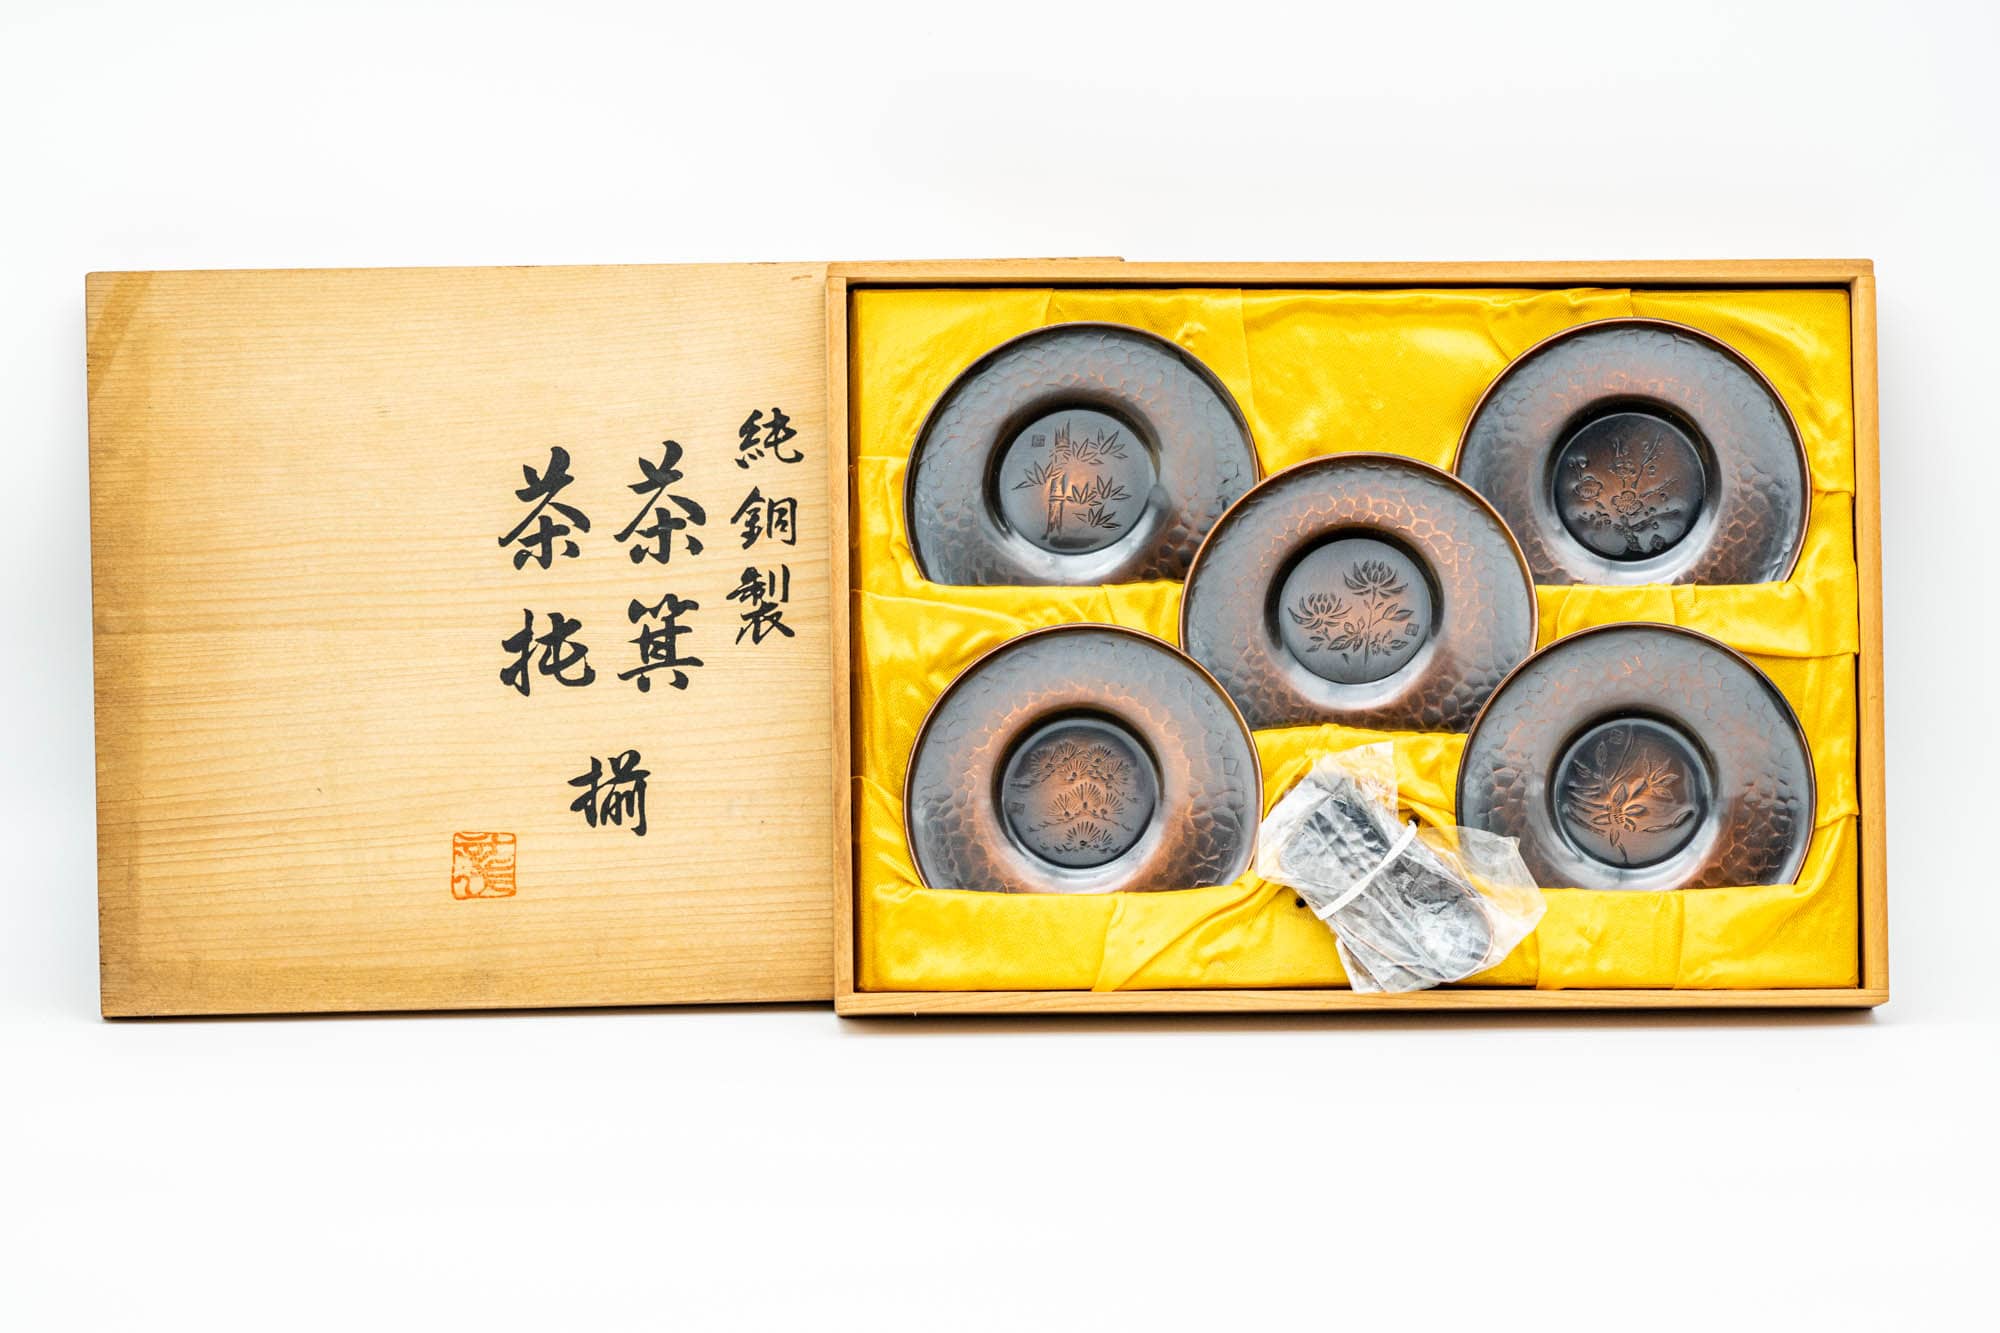 Japanese Chataku - Set of 5 Hammered Copper Uniquely Engraved Tea Saucers with 3 Chasaji Tea Scoops in Wooden Box